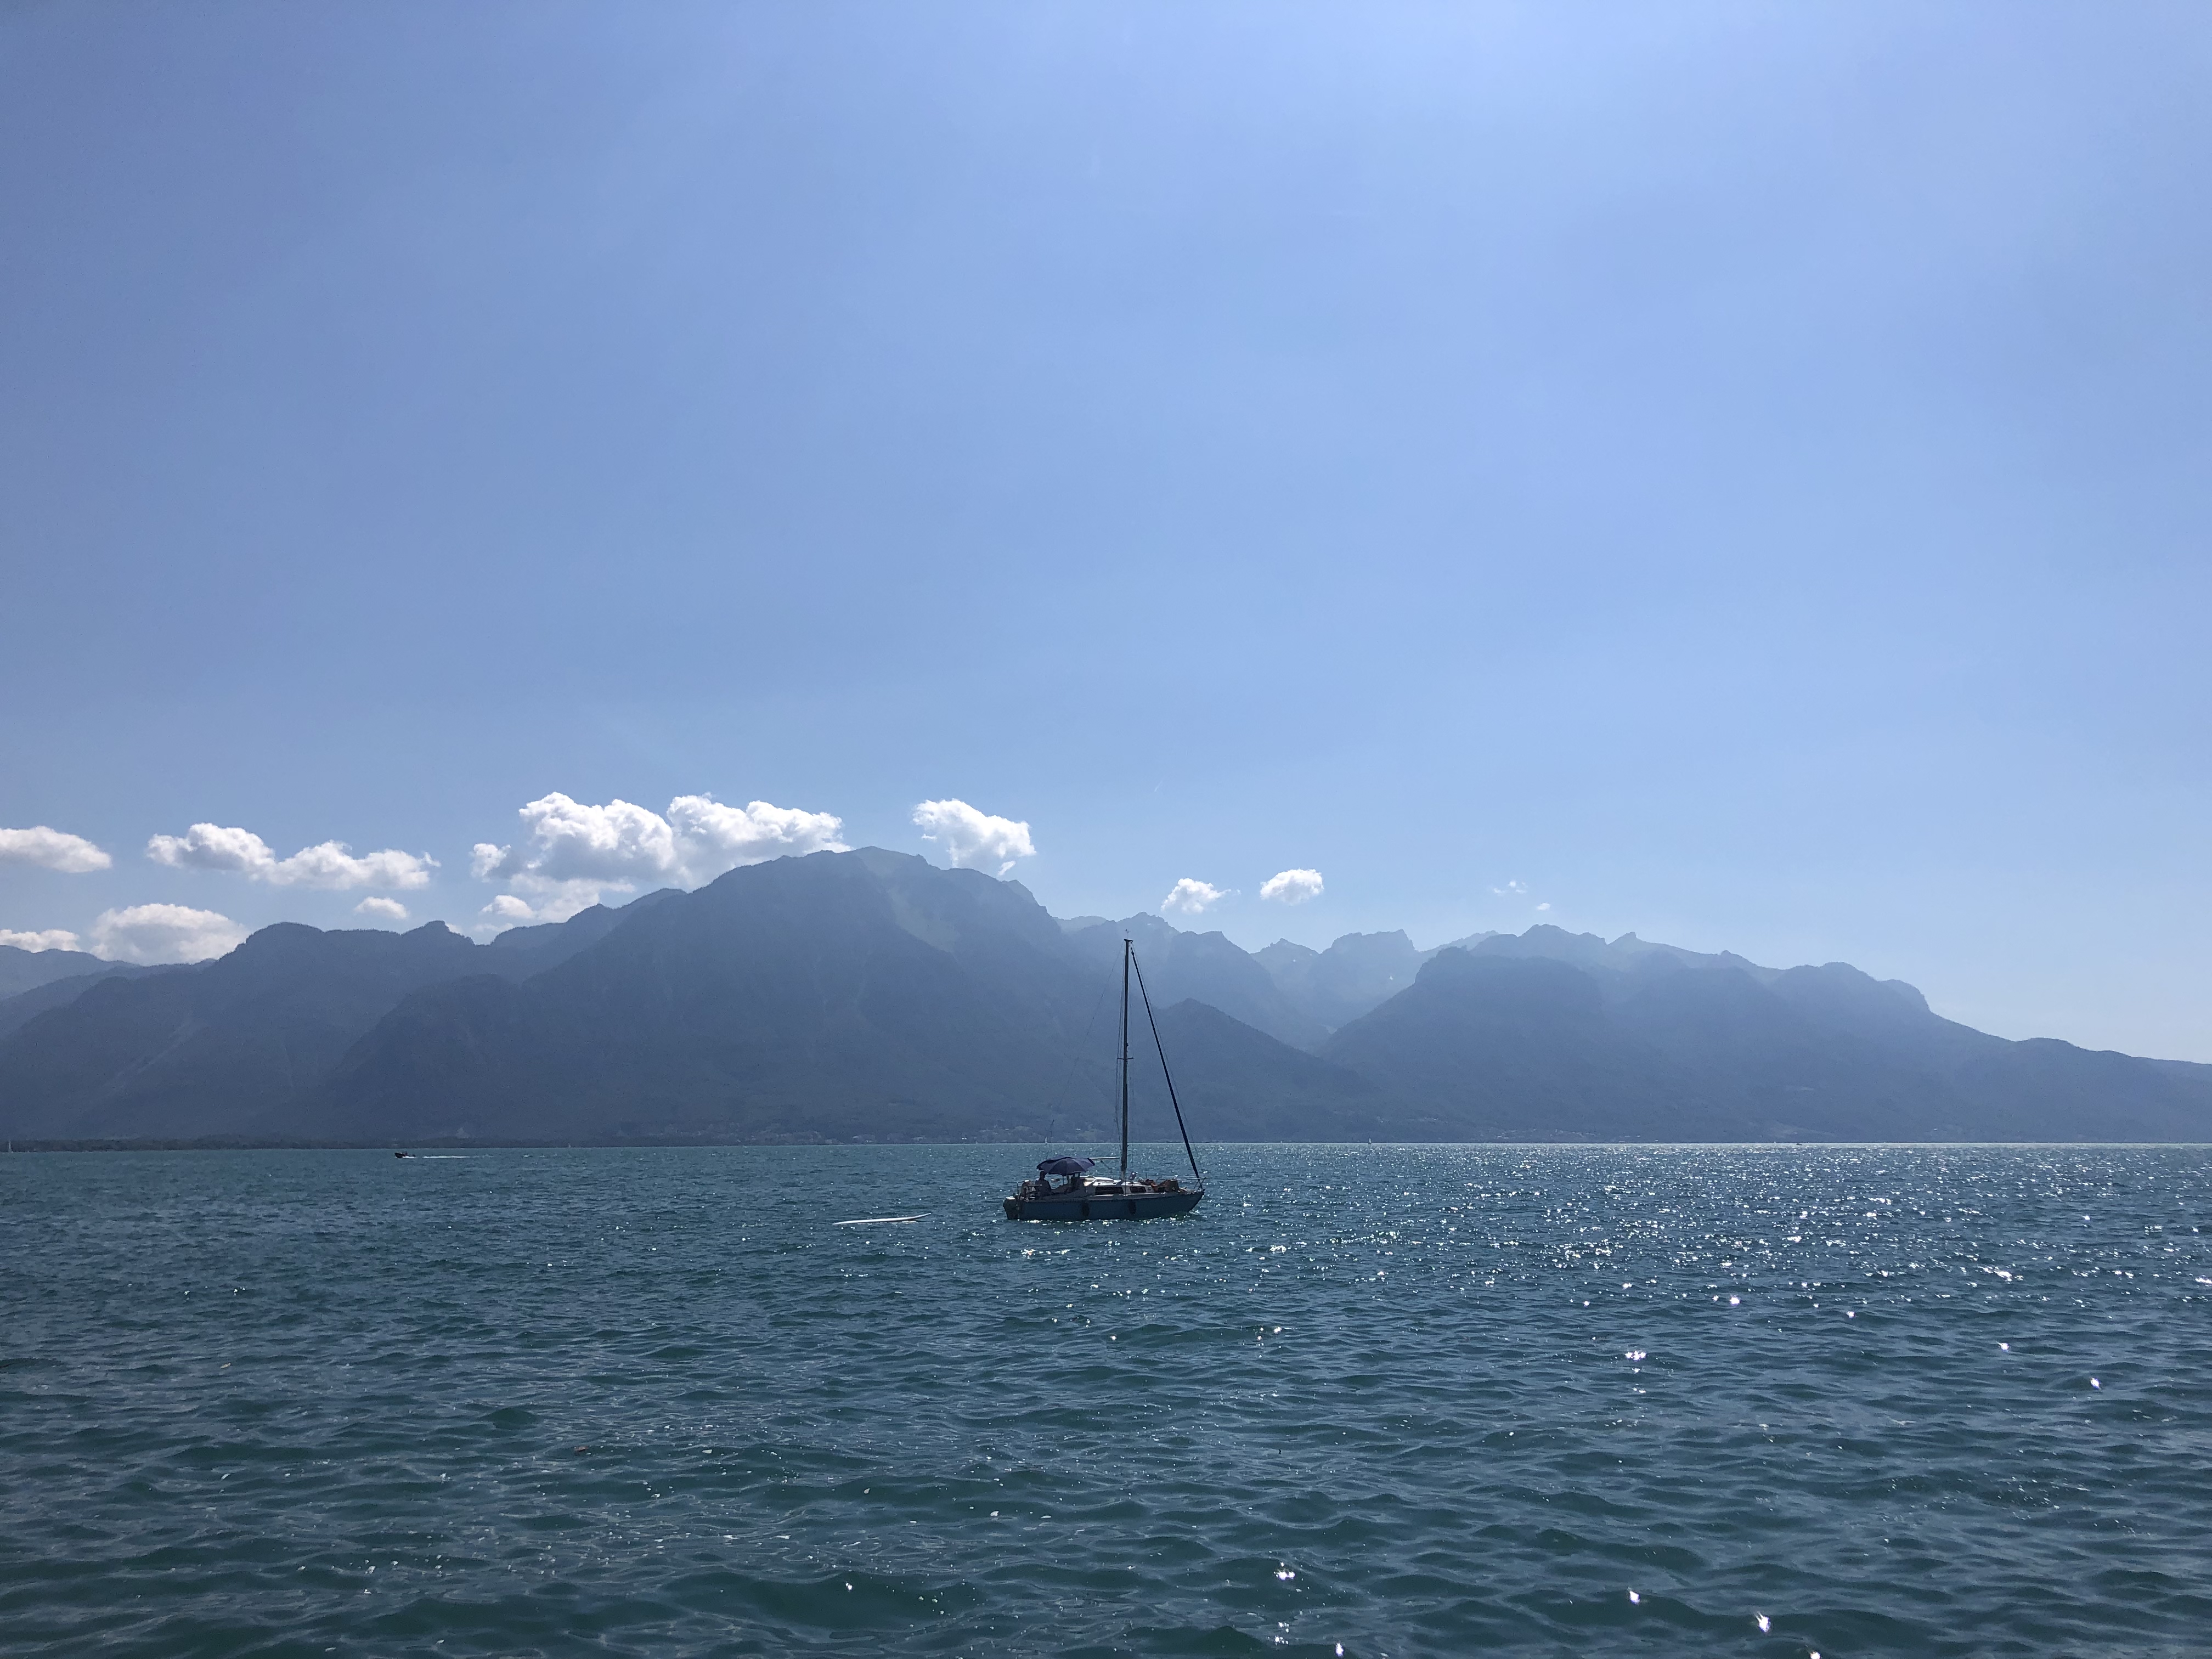 Lake Geneva with mountains in the background and a floating sailboat